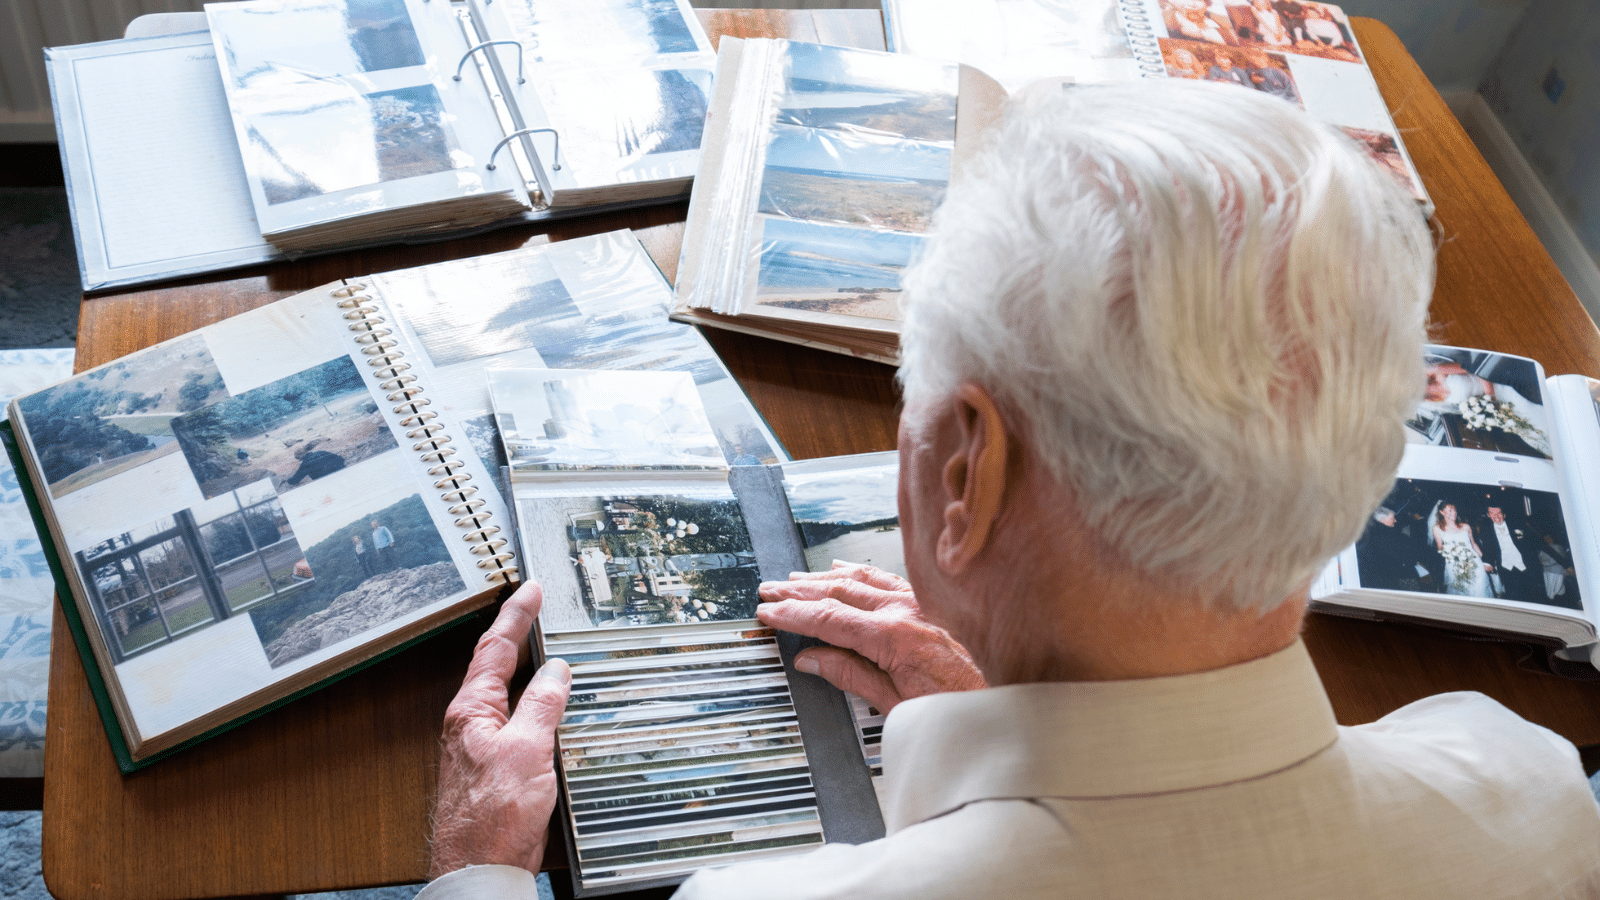 A man looking at multiple photo albums.